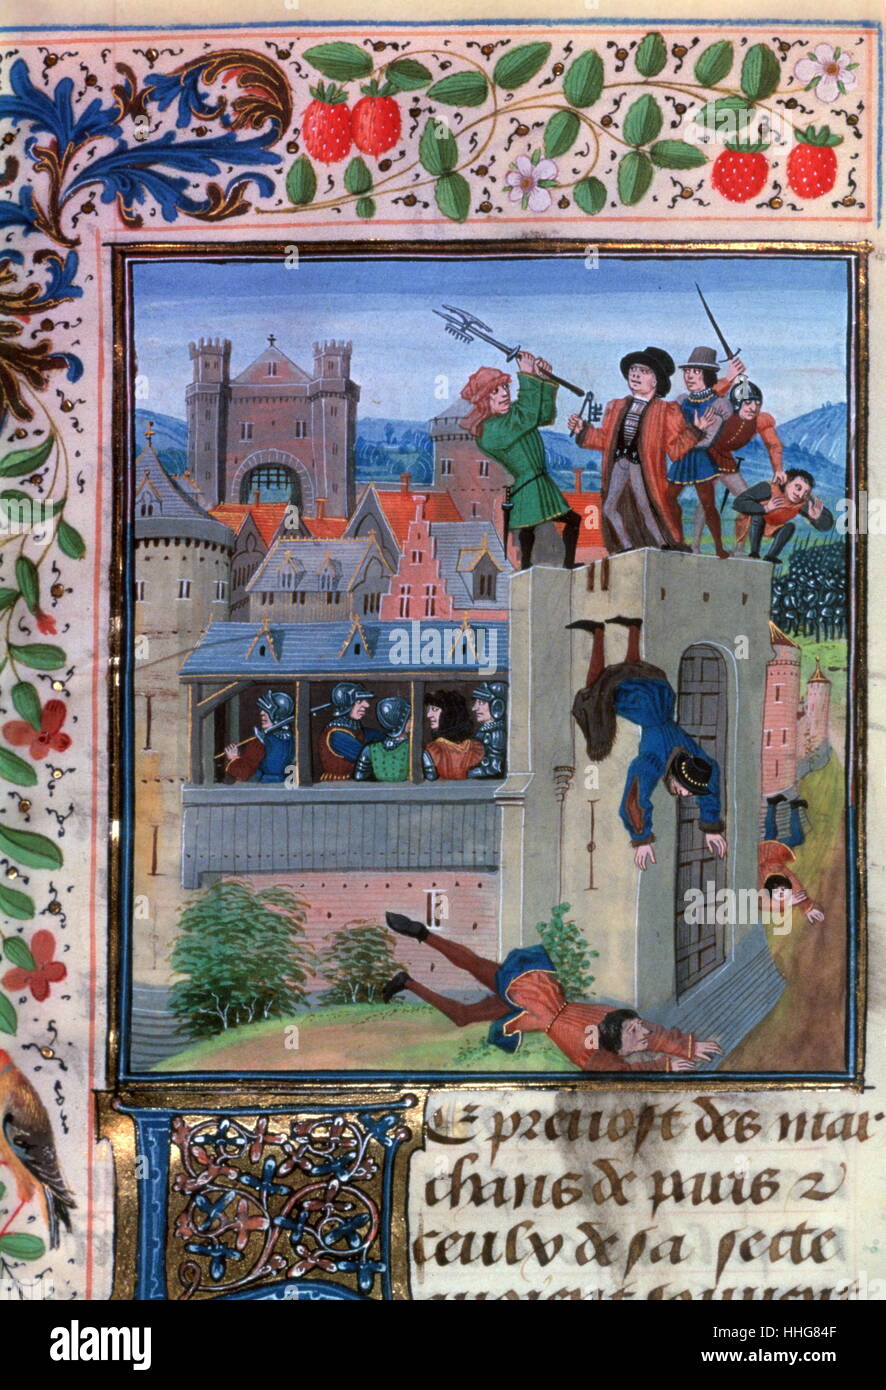 Murder of d'Étienne Marcel in 1358. Jean Froissart, Chroniques. Flandre, Bruges XVe s. fol. 230. (BNF , FR 2643). Étienne Marcel (between 1302 and 1310 – 31 July 1358) was provost of the merchants of Paris under King John II, called John the Good (Jean le Bon). He distinguished himself in the defense of the small craftsmen and guildsmen who made up most of the city population. Stock Photo